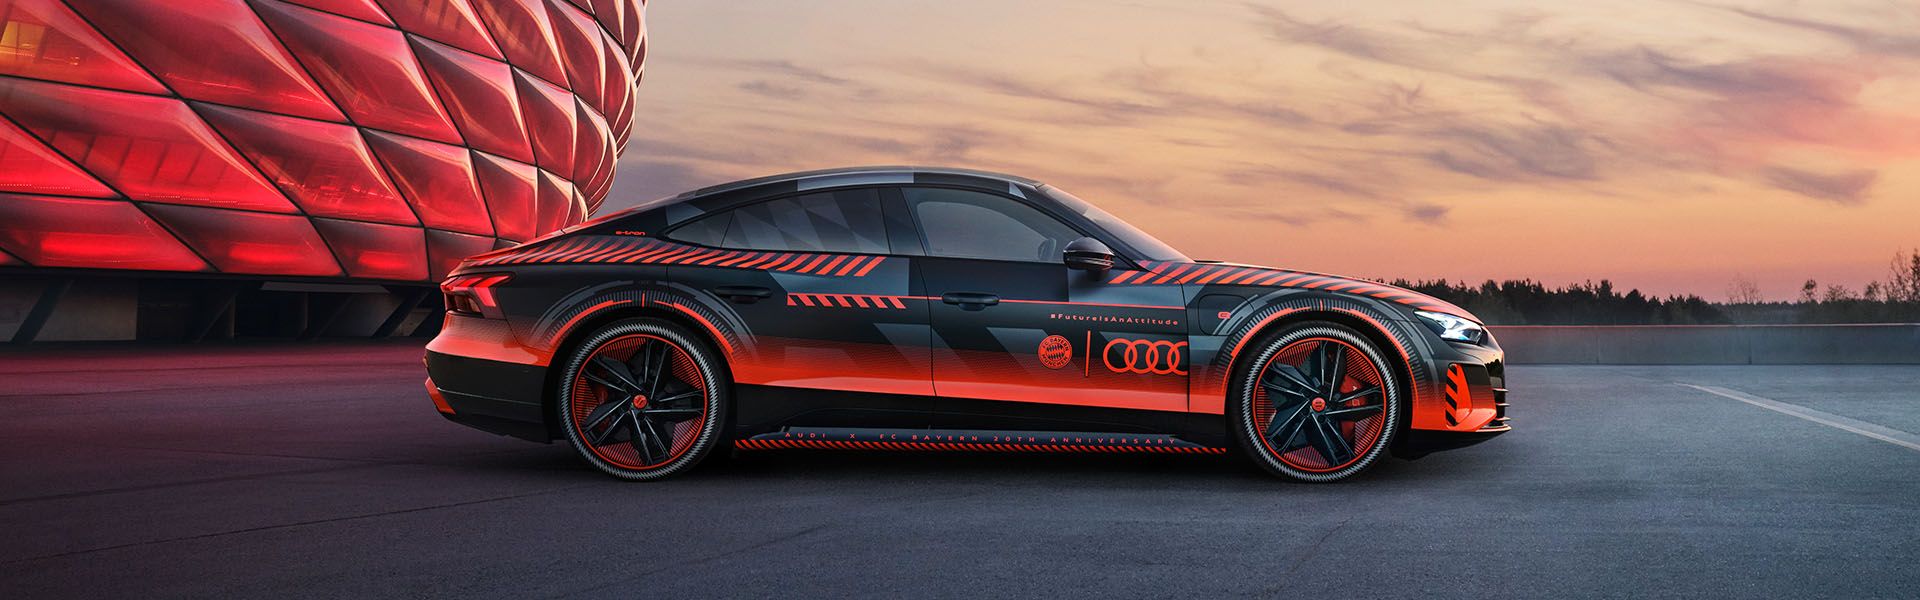 The Audi RS e-tron GT FC Bayern concept with special red livery in front of the Allianz Arena